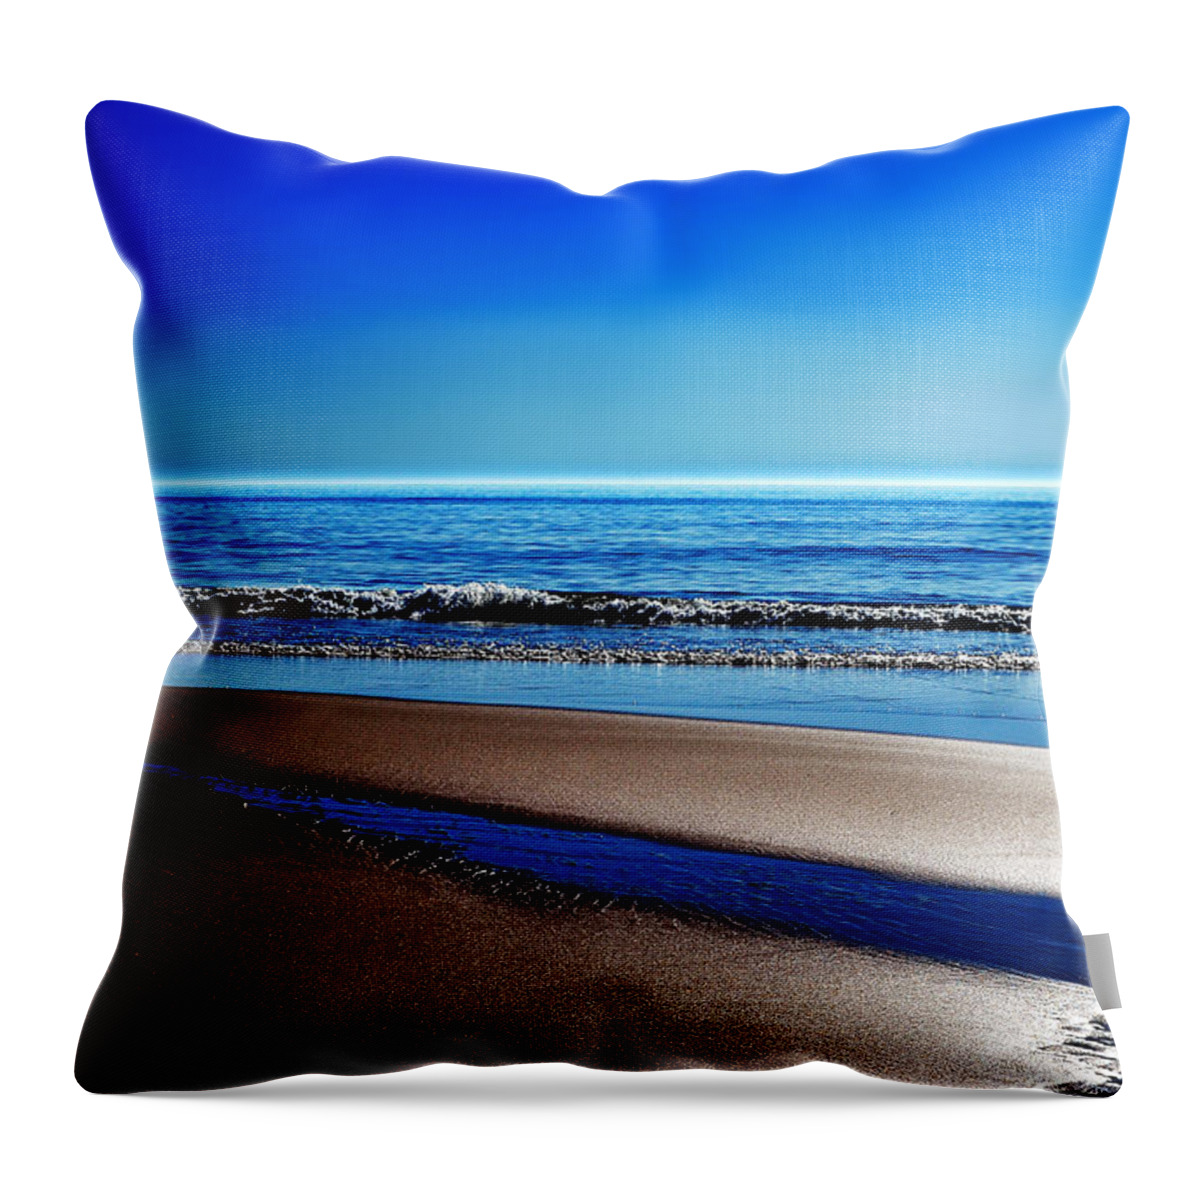 Sylt Throw Pillow featuring the photograph Silent Sylt by Hannes Cmarits